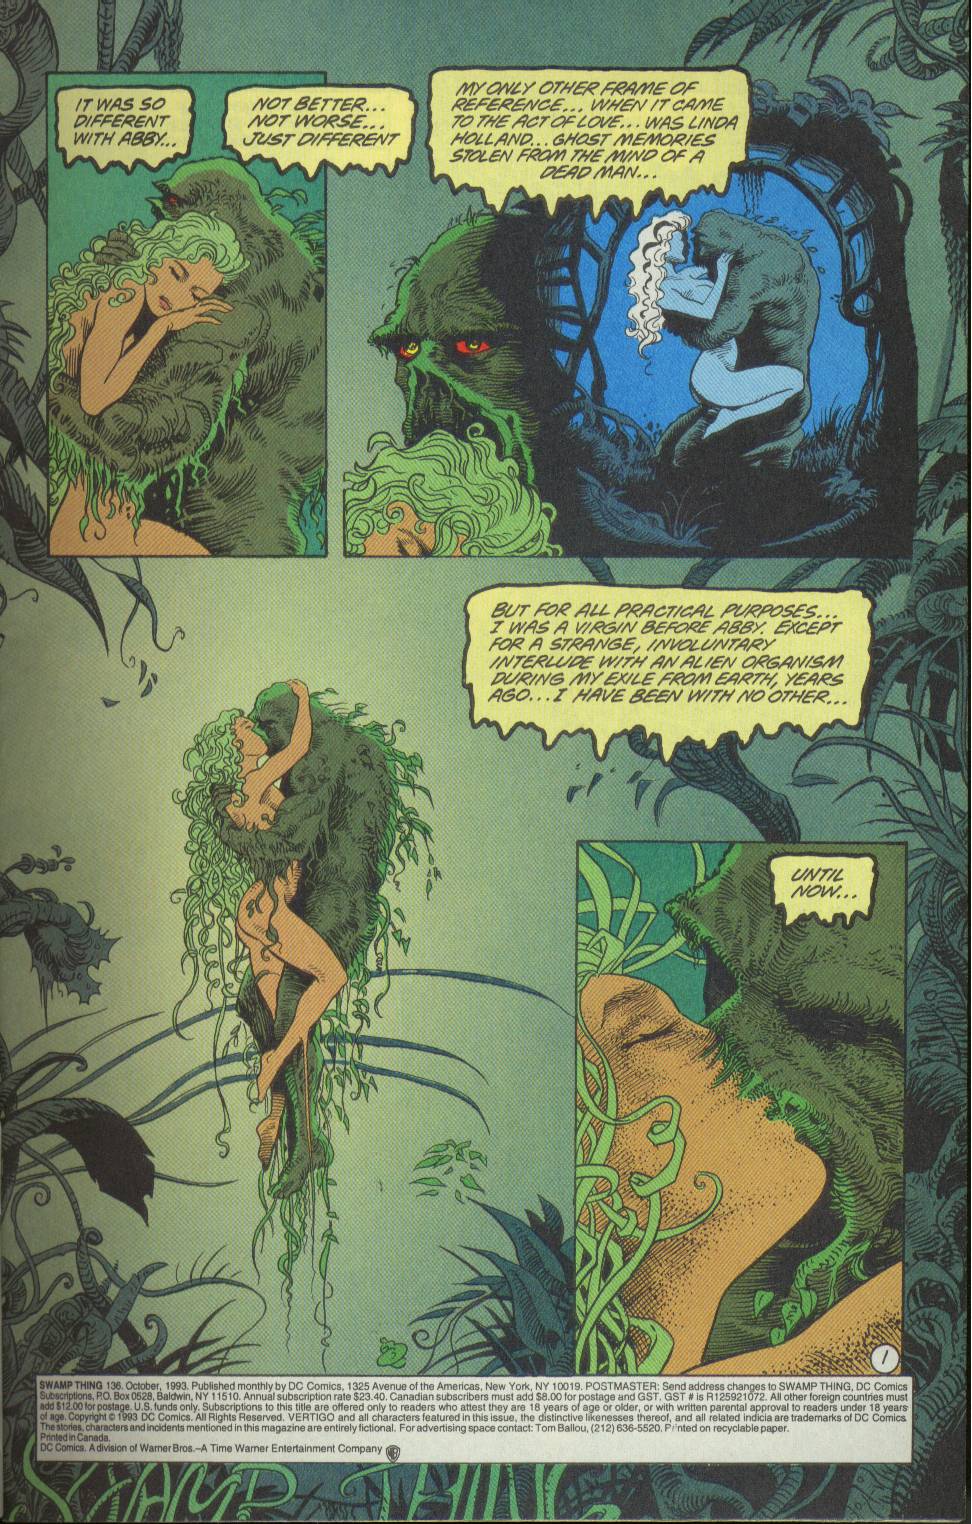 Swamp Thing Toon Xxx - Swamp Thing V2 136 | Read Swamp Thing V2 136 comic online in high quality.  Read Full Comic online for free - Read comics online in high quality  .|viewcomiconline.com